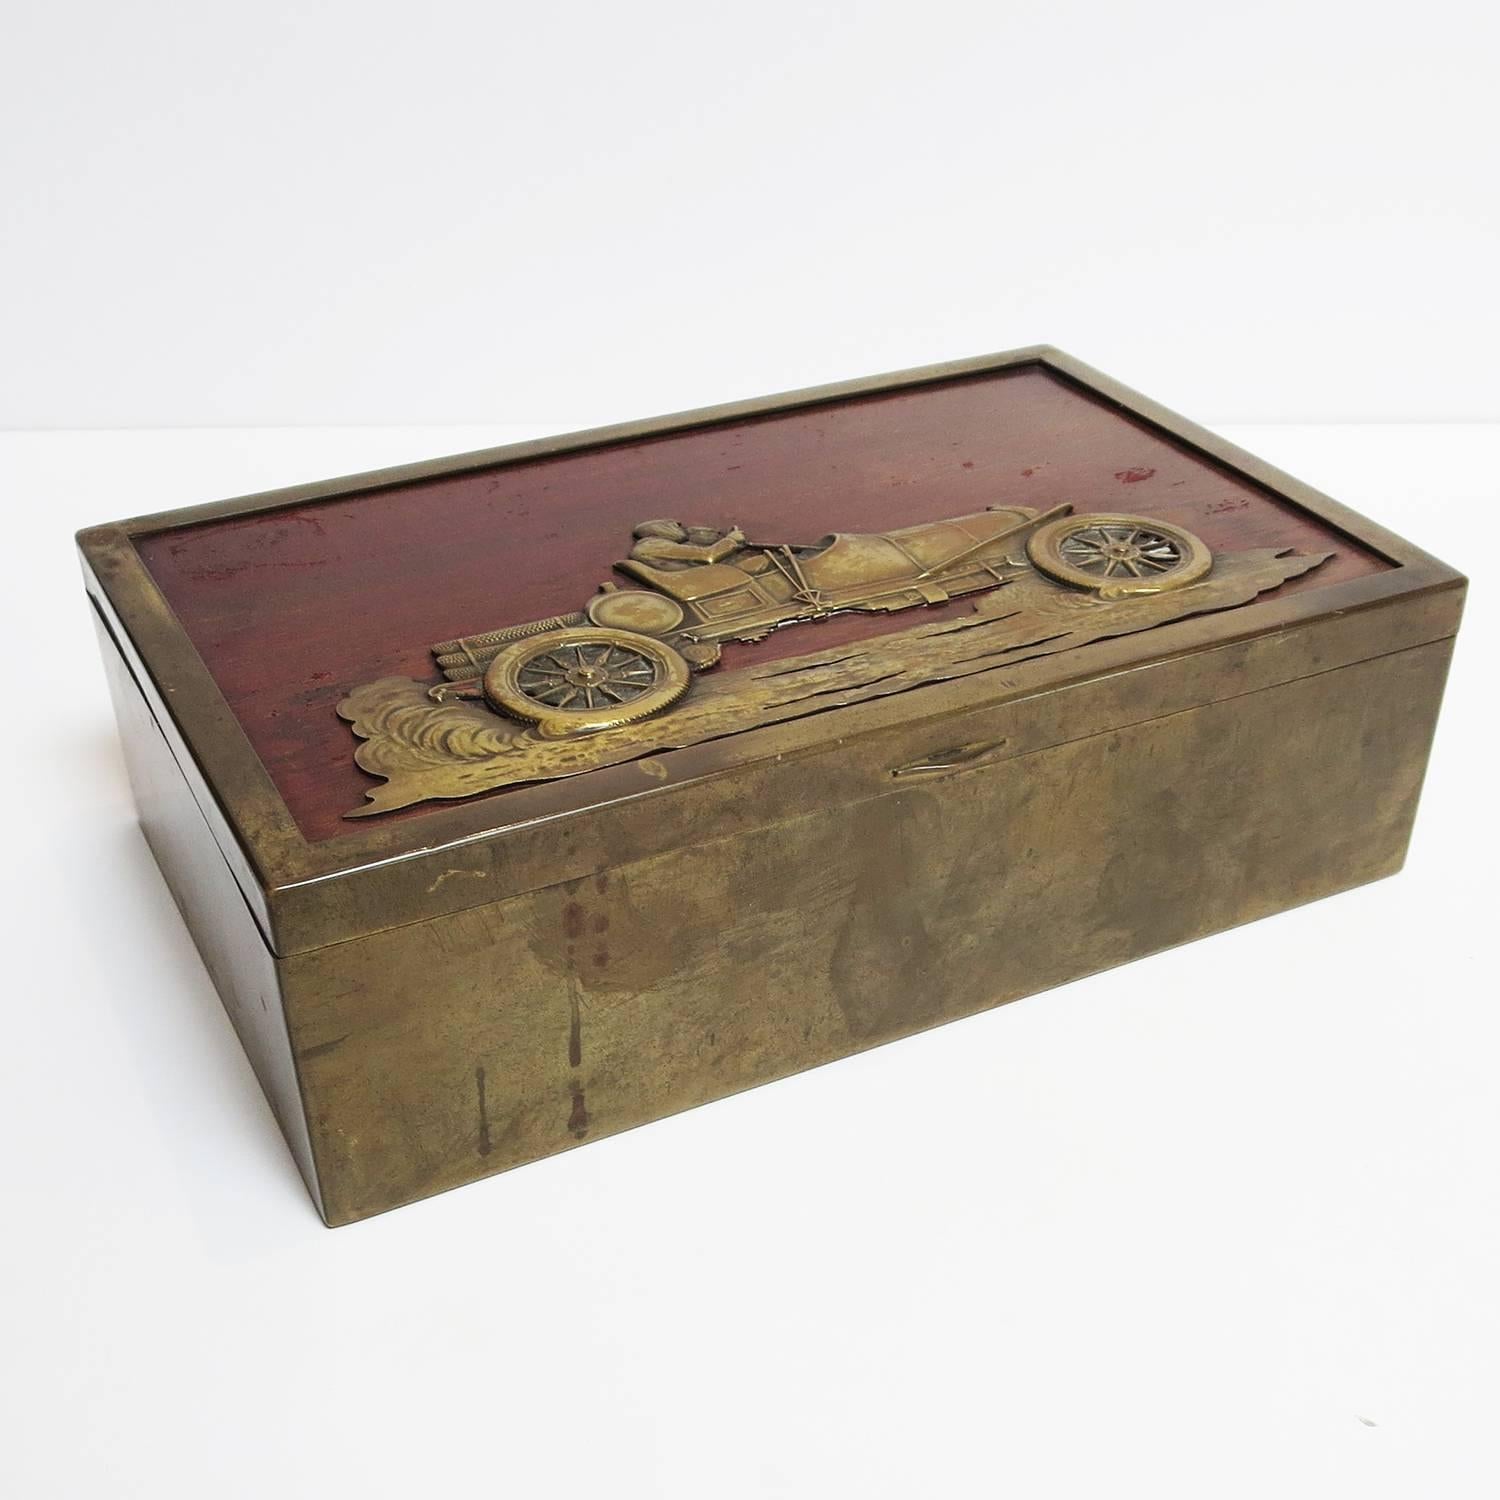 This fantastic box is the ultimate desk top box for any automotive enthusiast. The box, and the car represented on top, and from the late teens, early 1920's. The car is kicking up the dirt as it speeds along, and is a raised hammered bronze or